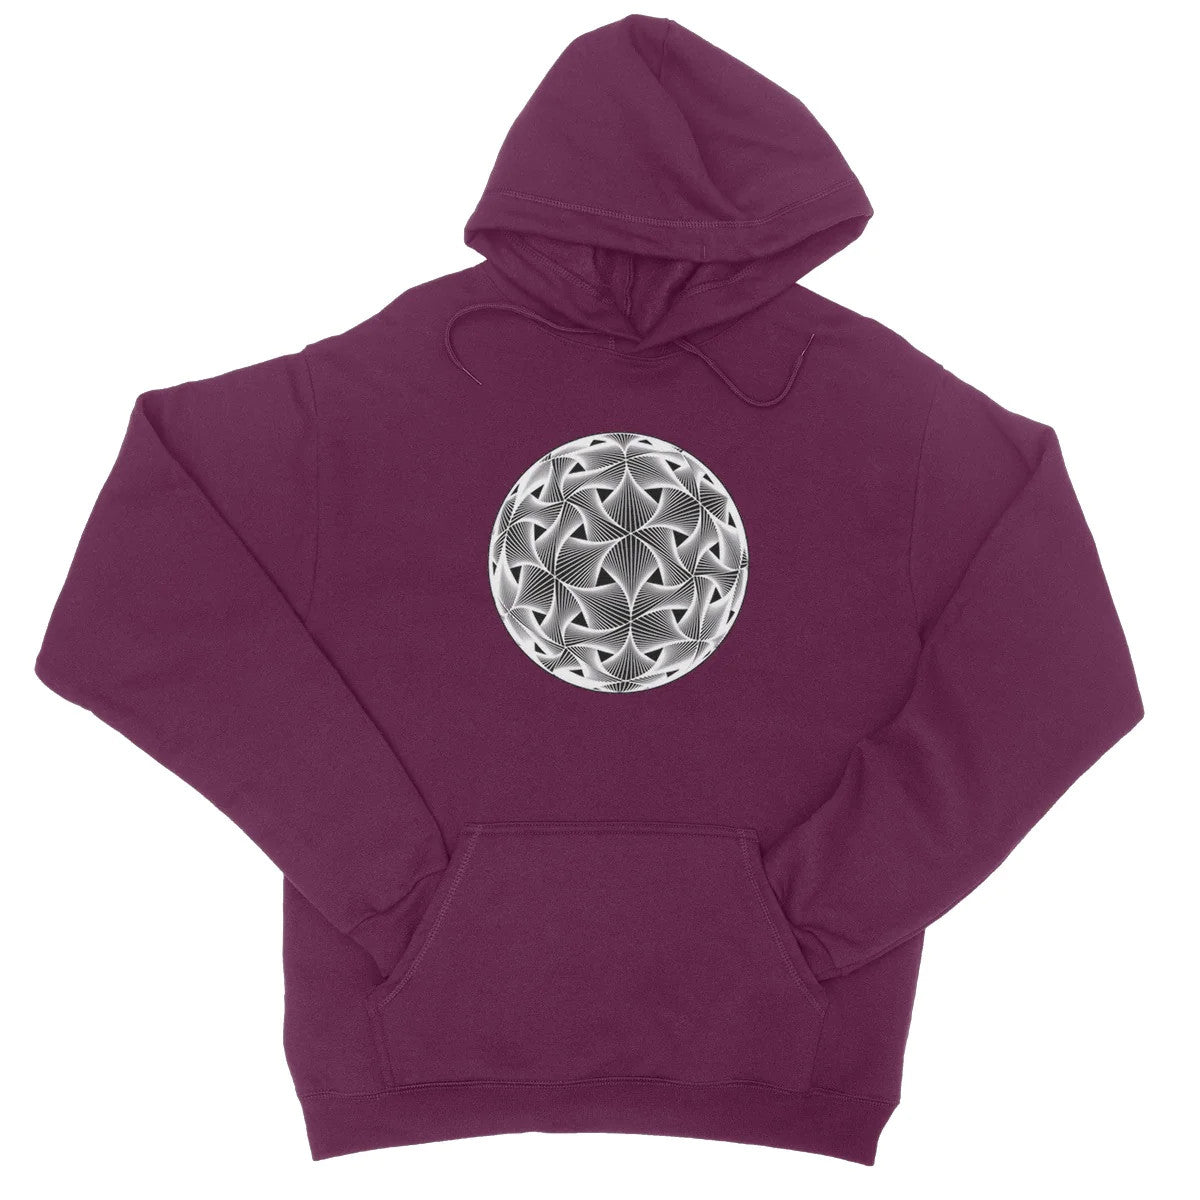 A burgundy hoodie with a spherical white mesh having icosahedral symmetry